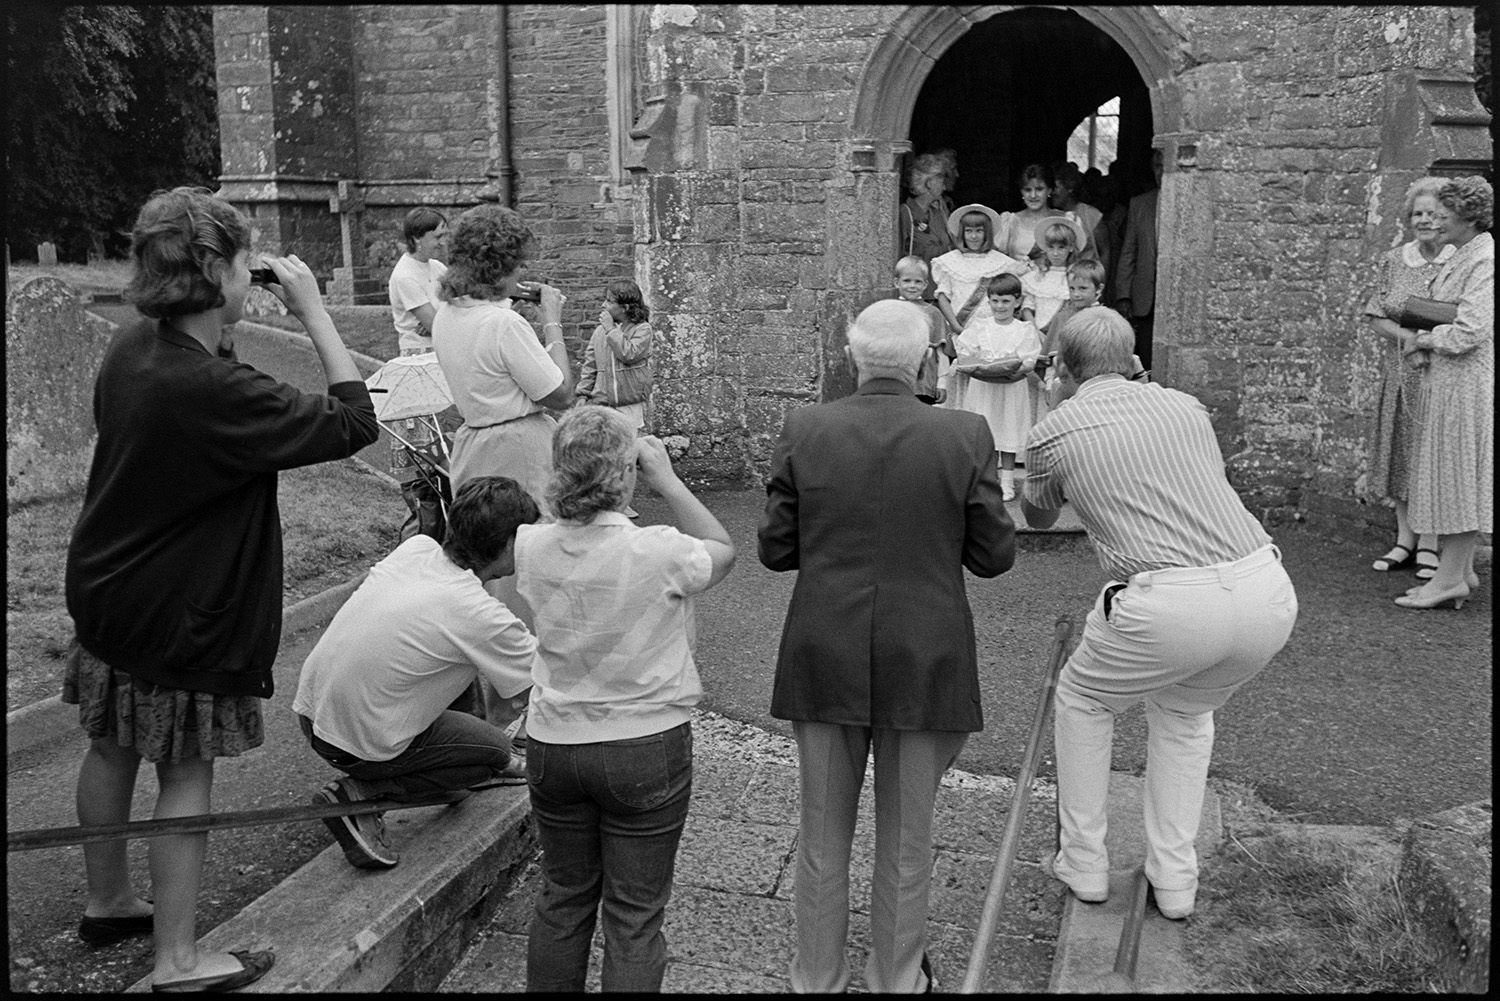 Chulmleigh Fair, Queen and attendants leaving church and processing through village.
[People taking photographs of the Chulmleigh Fair Queen and her attendants stood in the porch of the Church of St Mary Magdalene, Chulmleigh. before parading down to the town centre for Chulmleigh Fair.]]